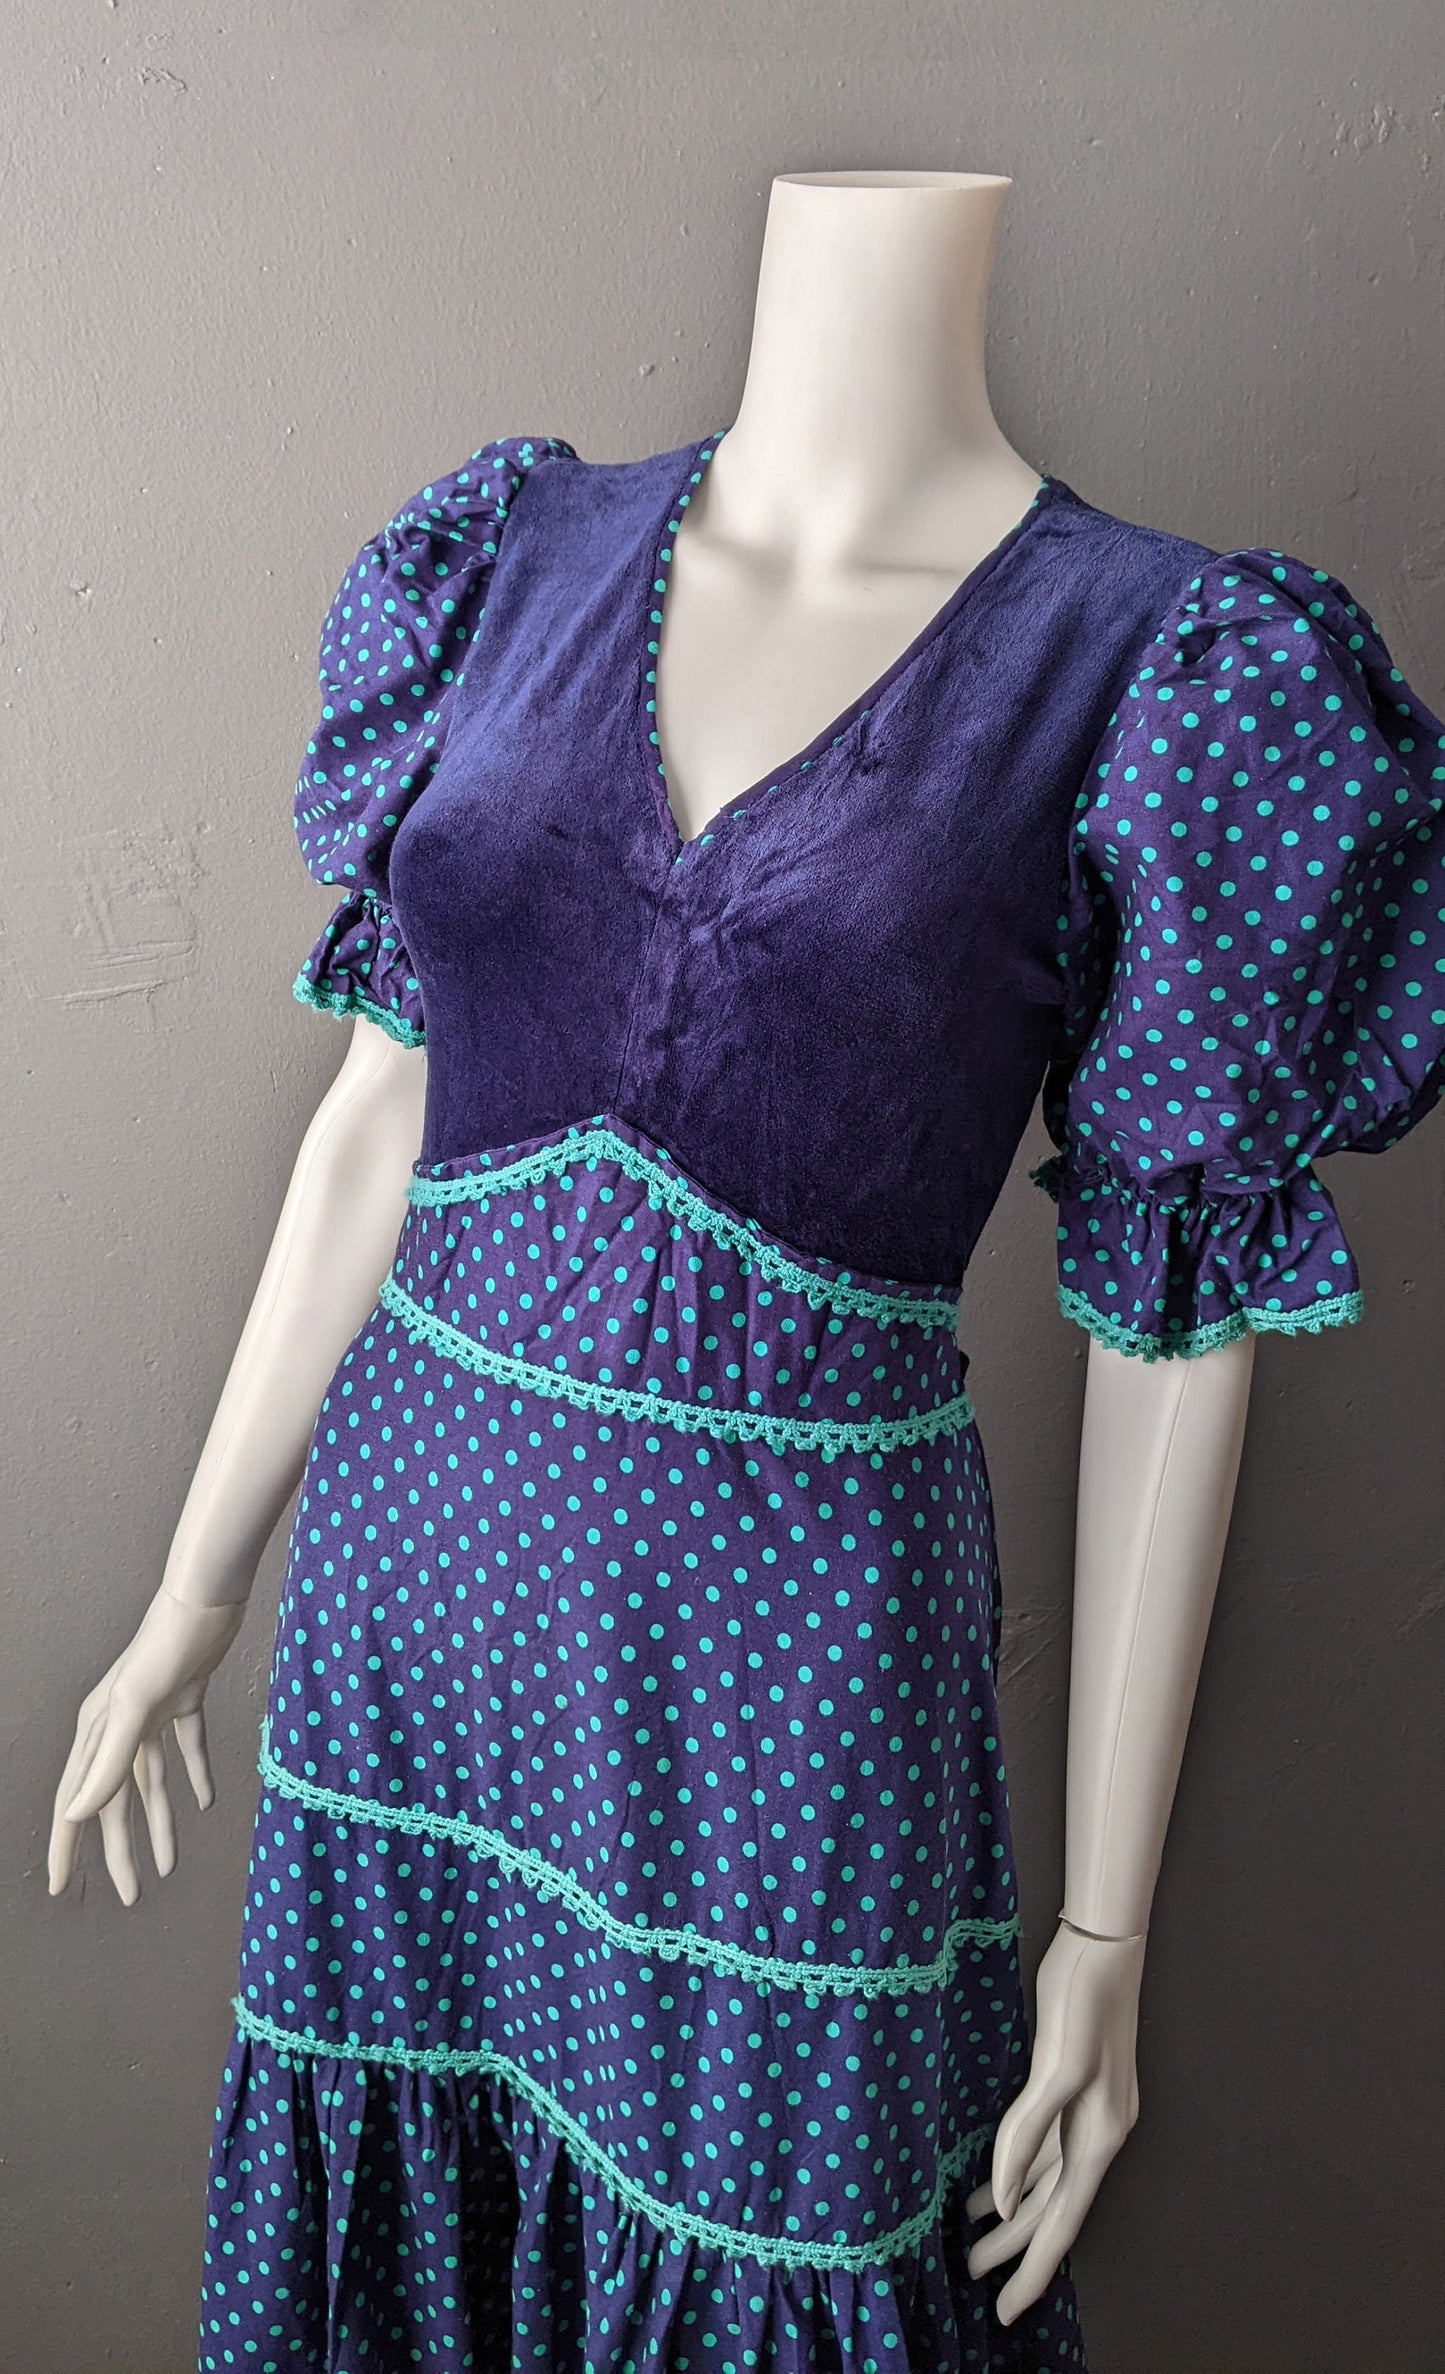 70s Polka Dot Maxi Dress by C&A, Victoriana Prairie Style with Puff Sleeves, Size Small